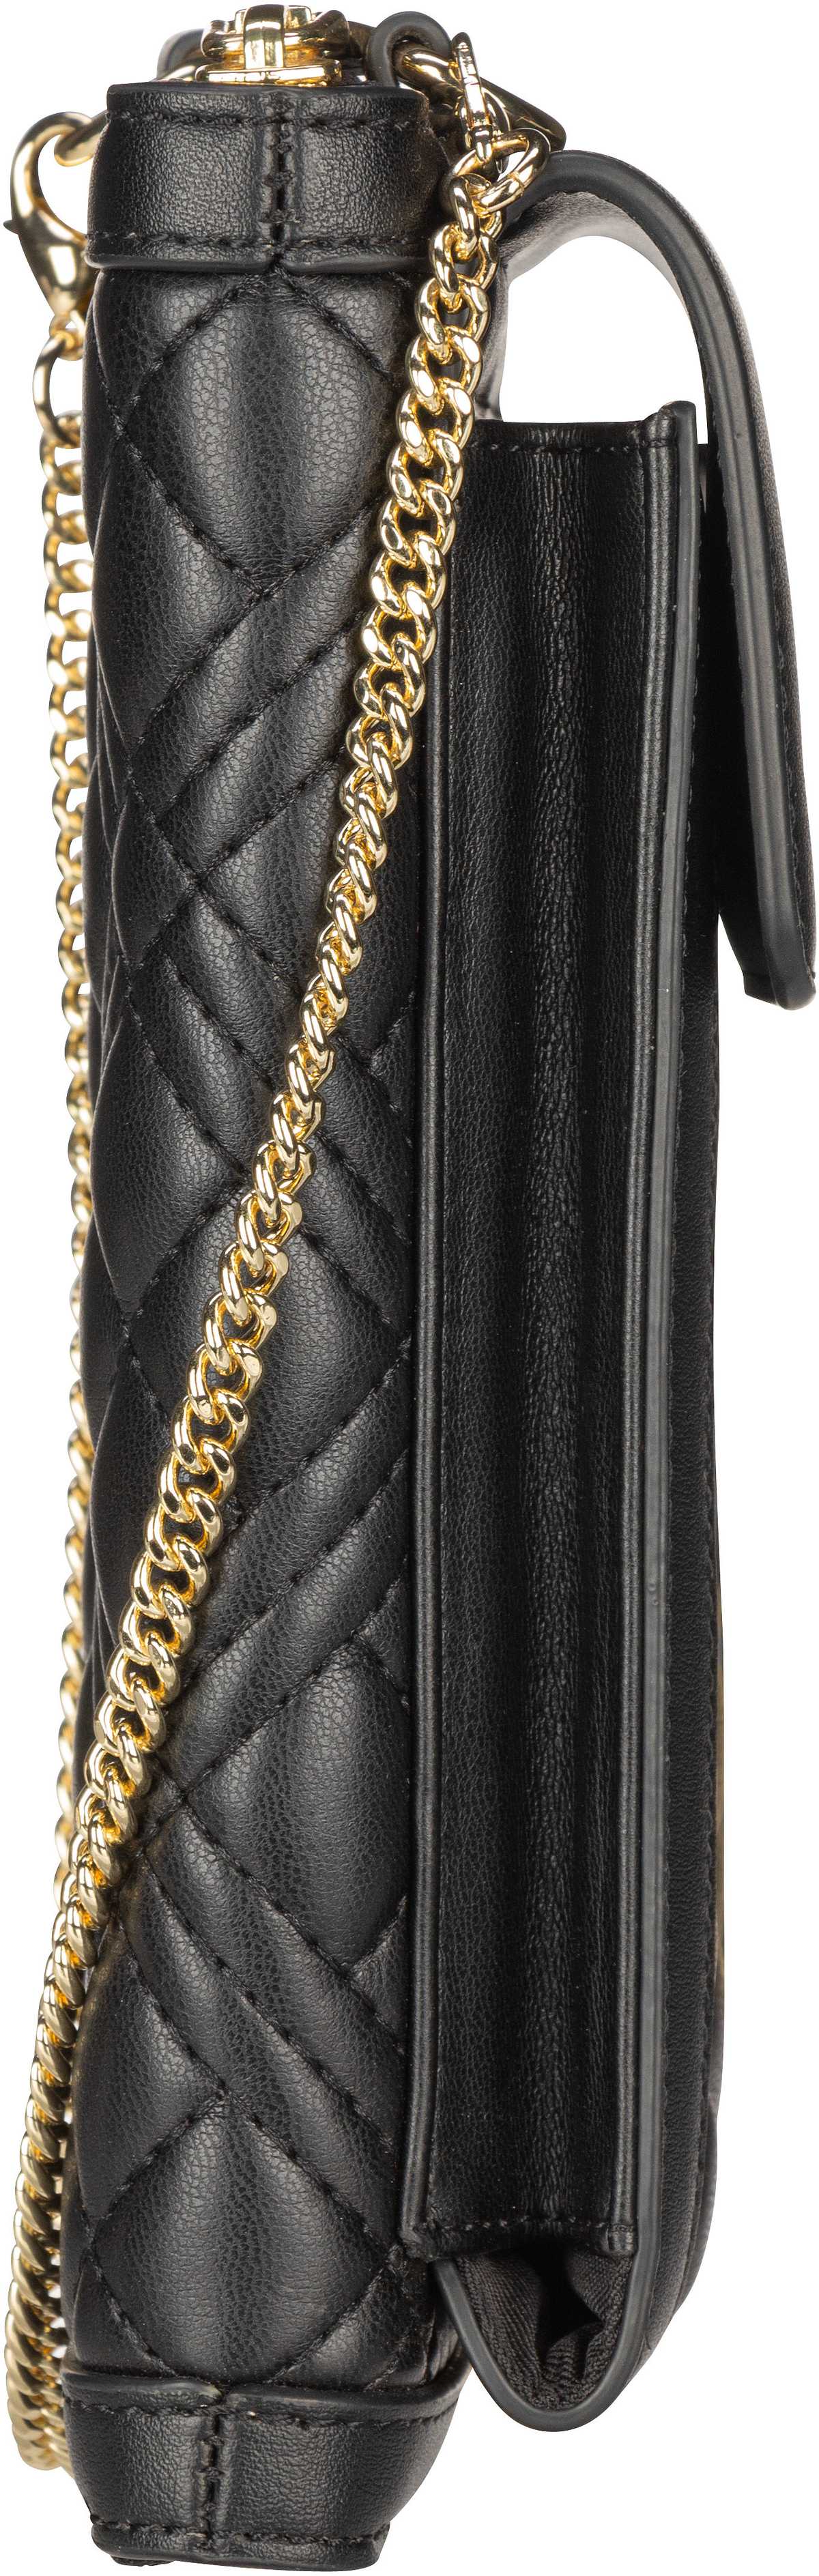 Love Moschino Quilted Bag 5682 - Black